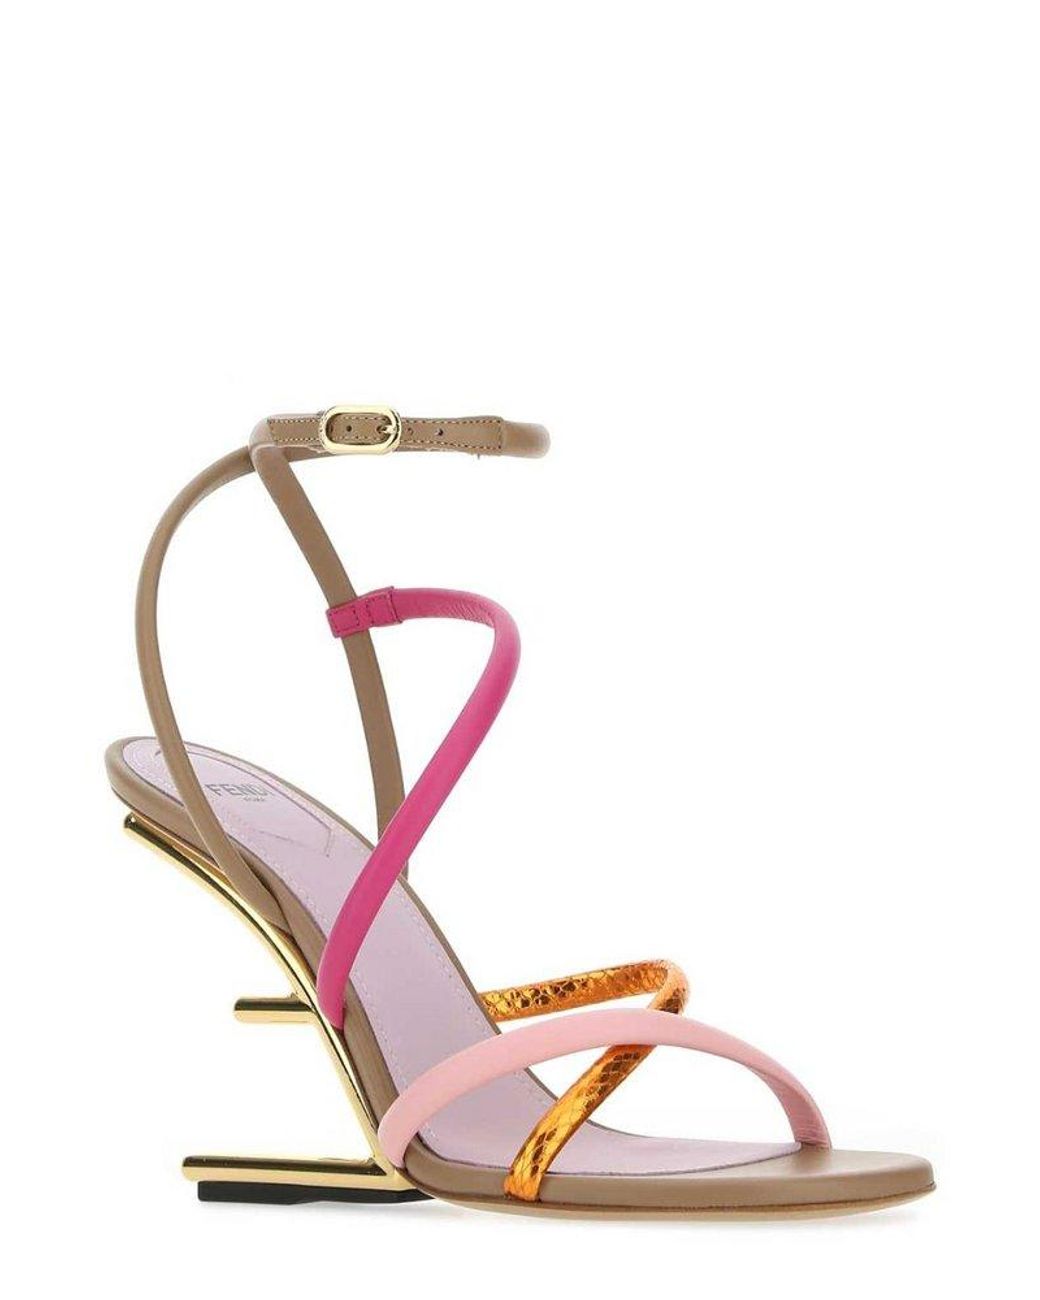 Fendi First Sculpted Heel Slingback Sandals in Pink | Lyst